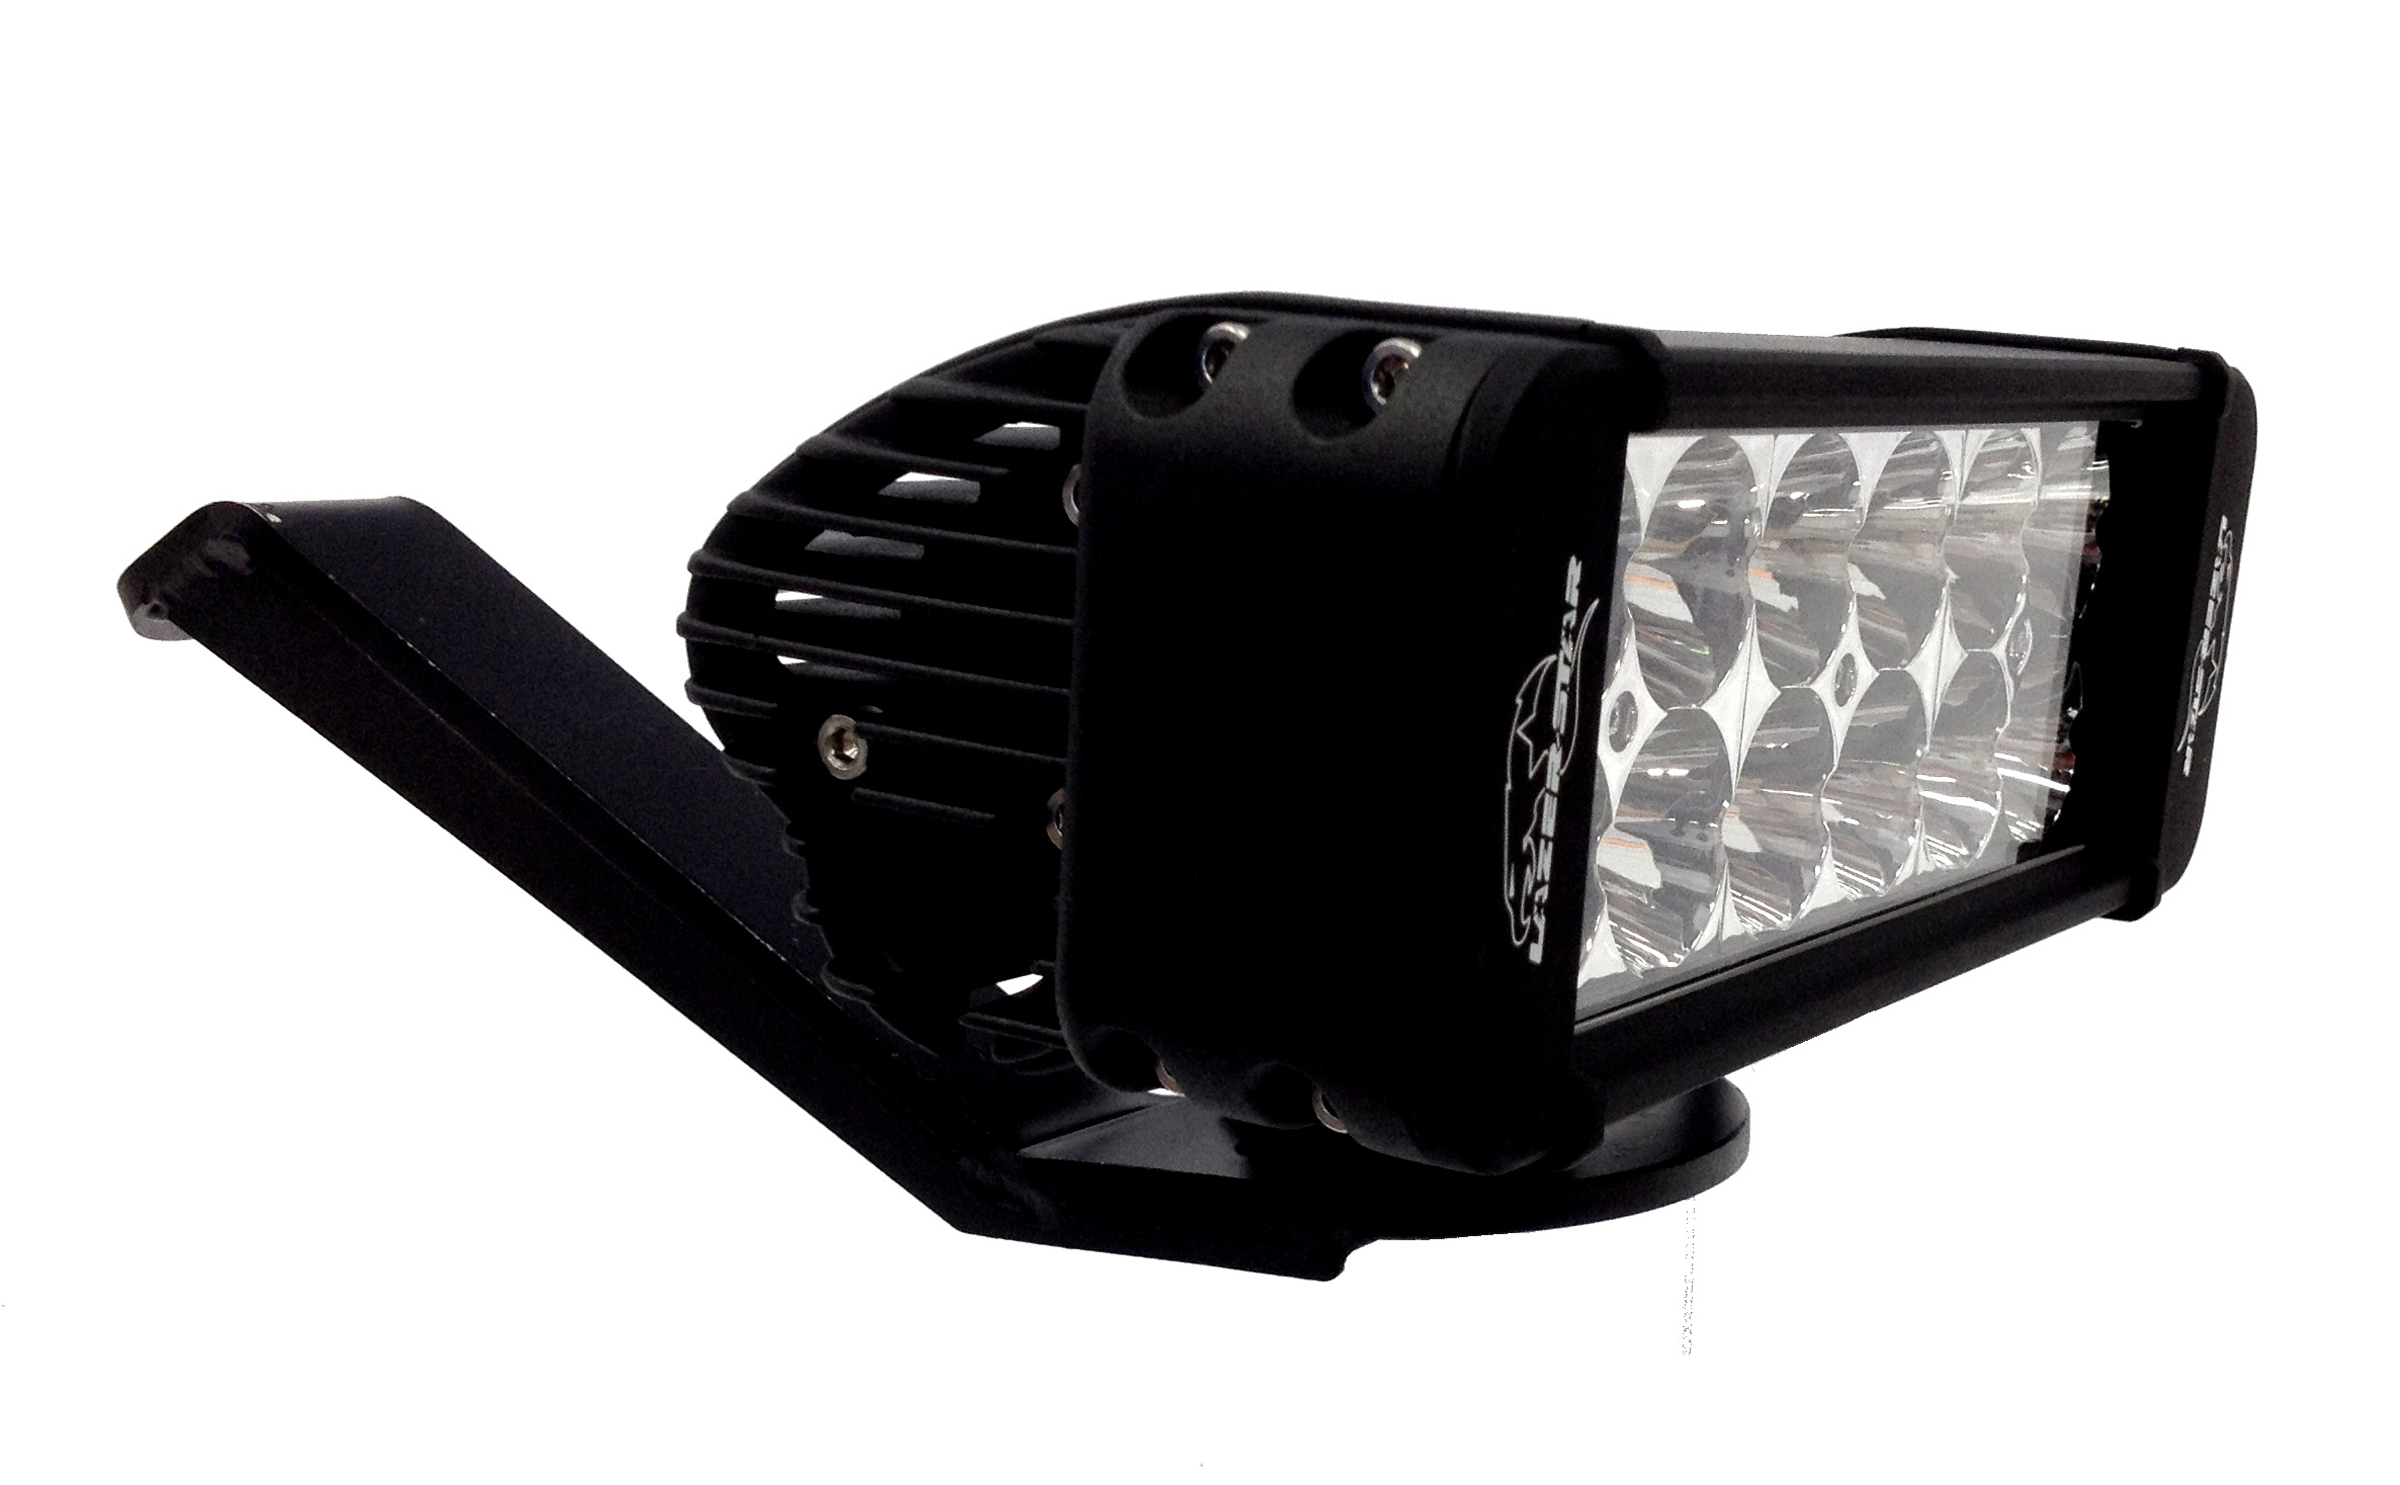 Lazer Star Lights LX LED ATV Handlebar Kit pictured here with the 8" Endeavour 3-watt LED and 4" Drop Bracket.